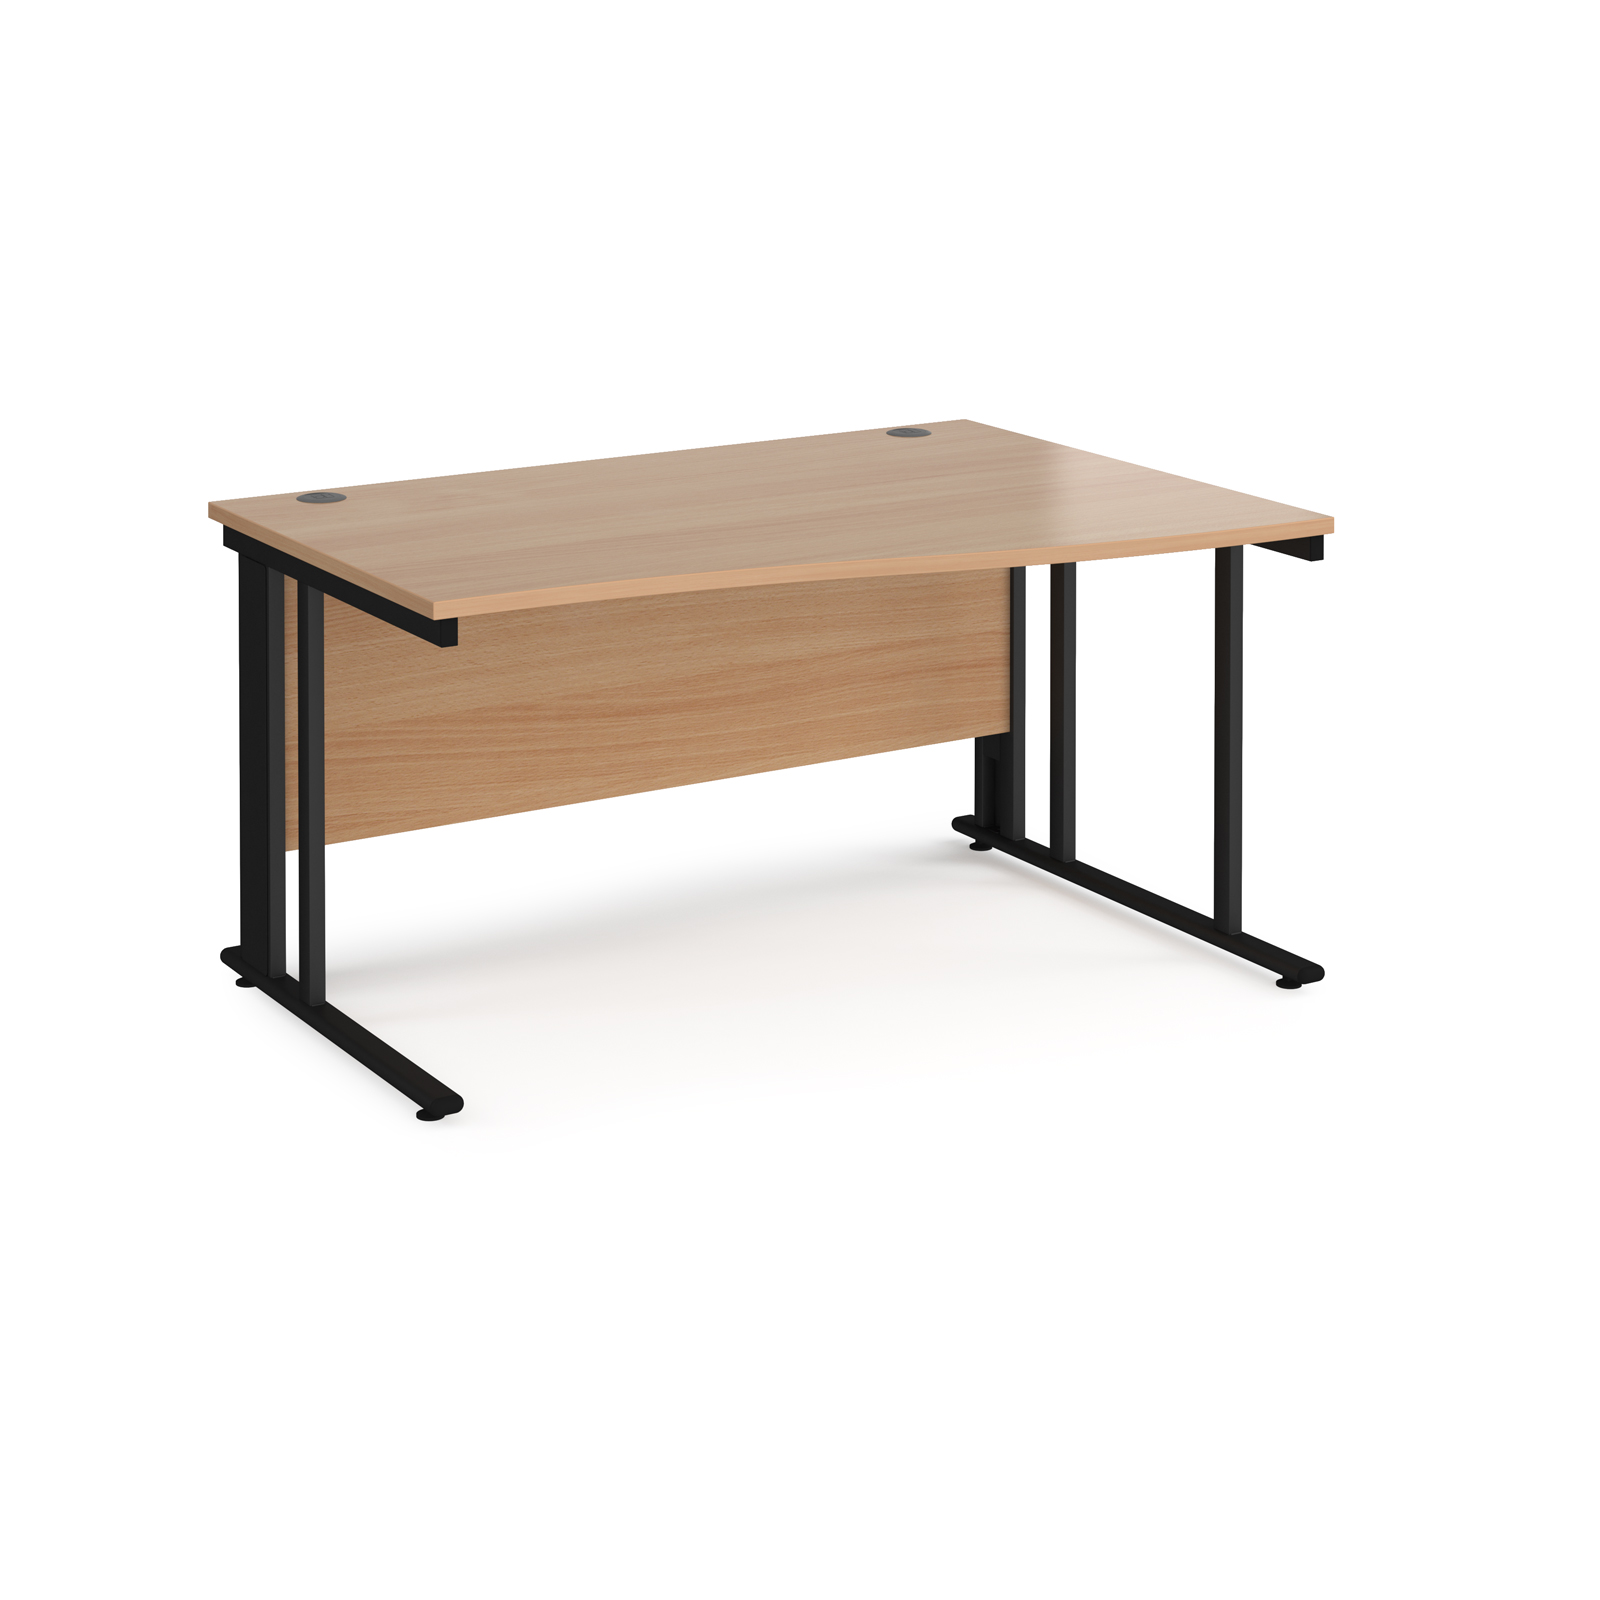 Maestro 25 right hand wave desk 1400mm wide - black cable managed leg frame, beech top